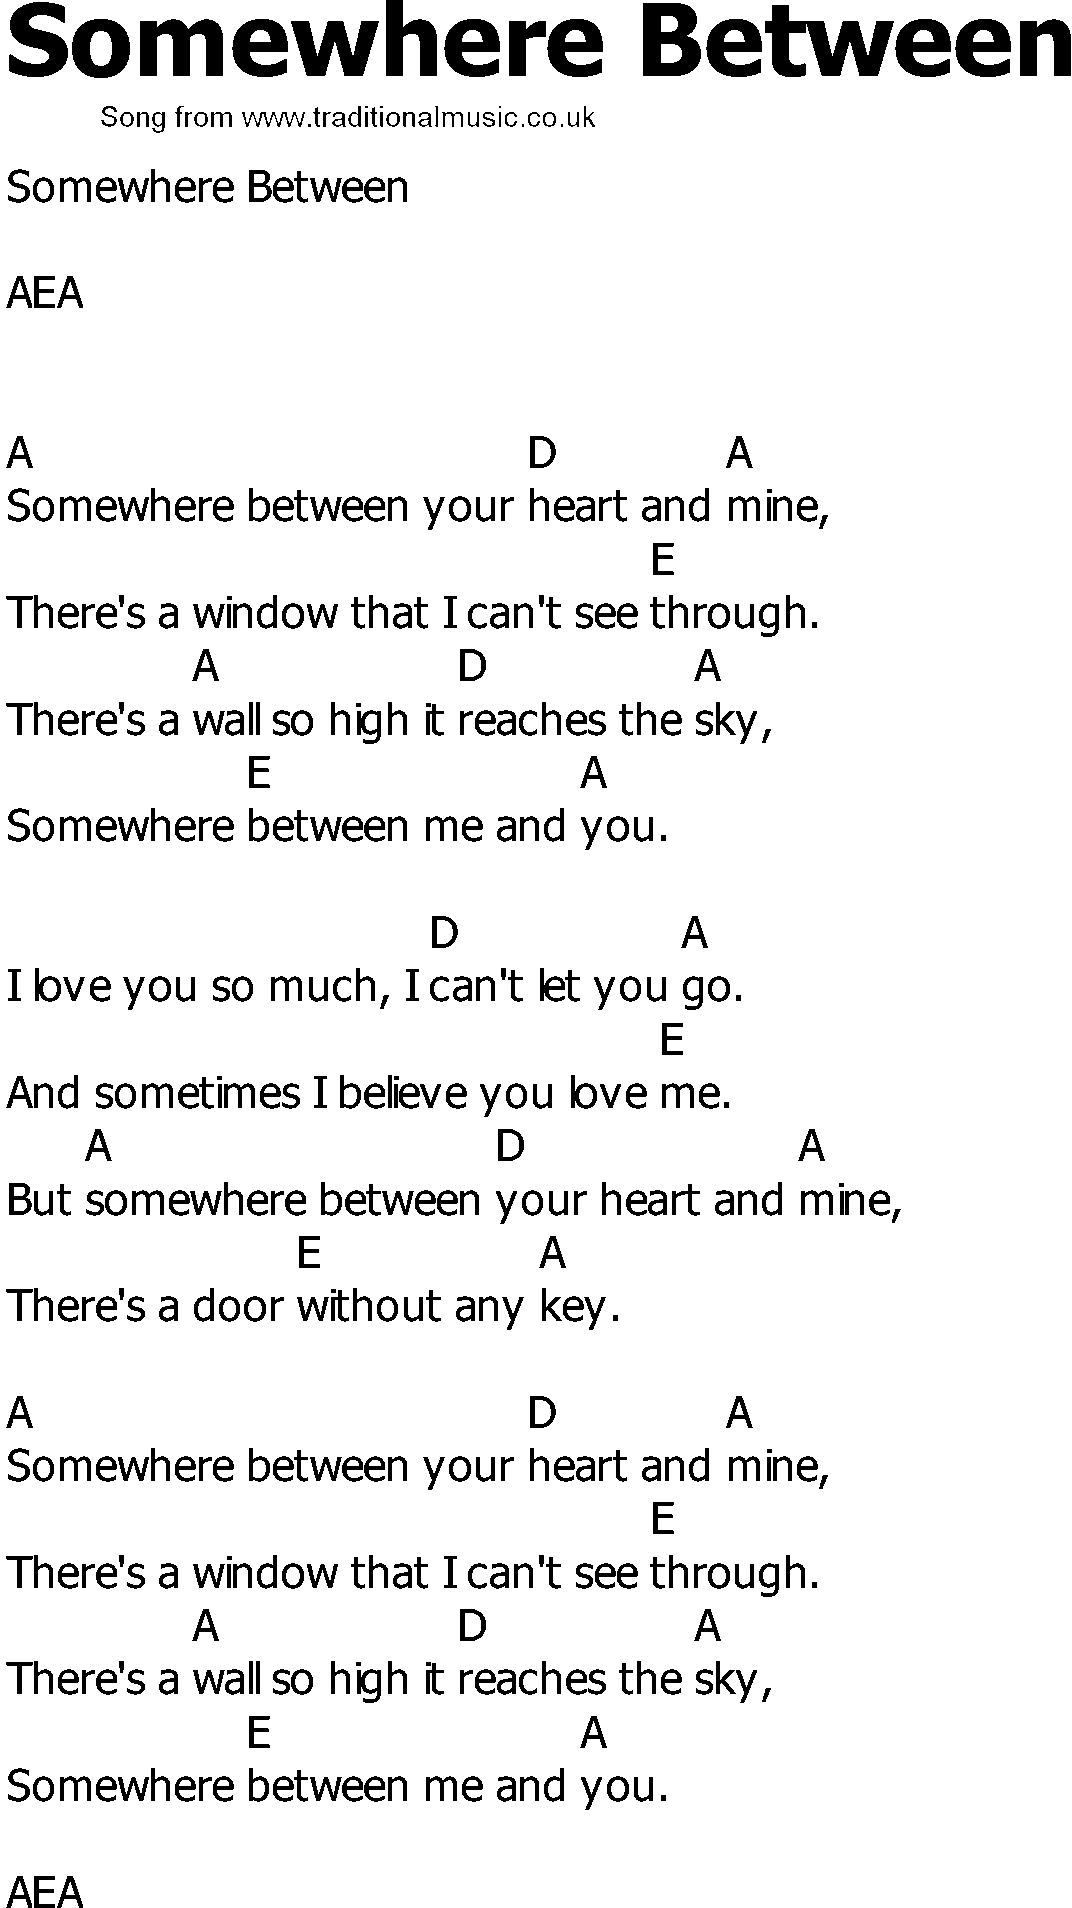 Old Country song lyrics with chords - Somewhere Between